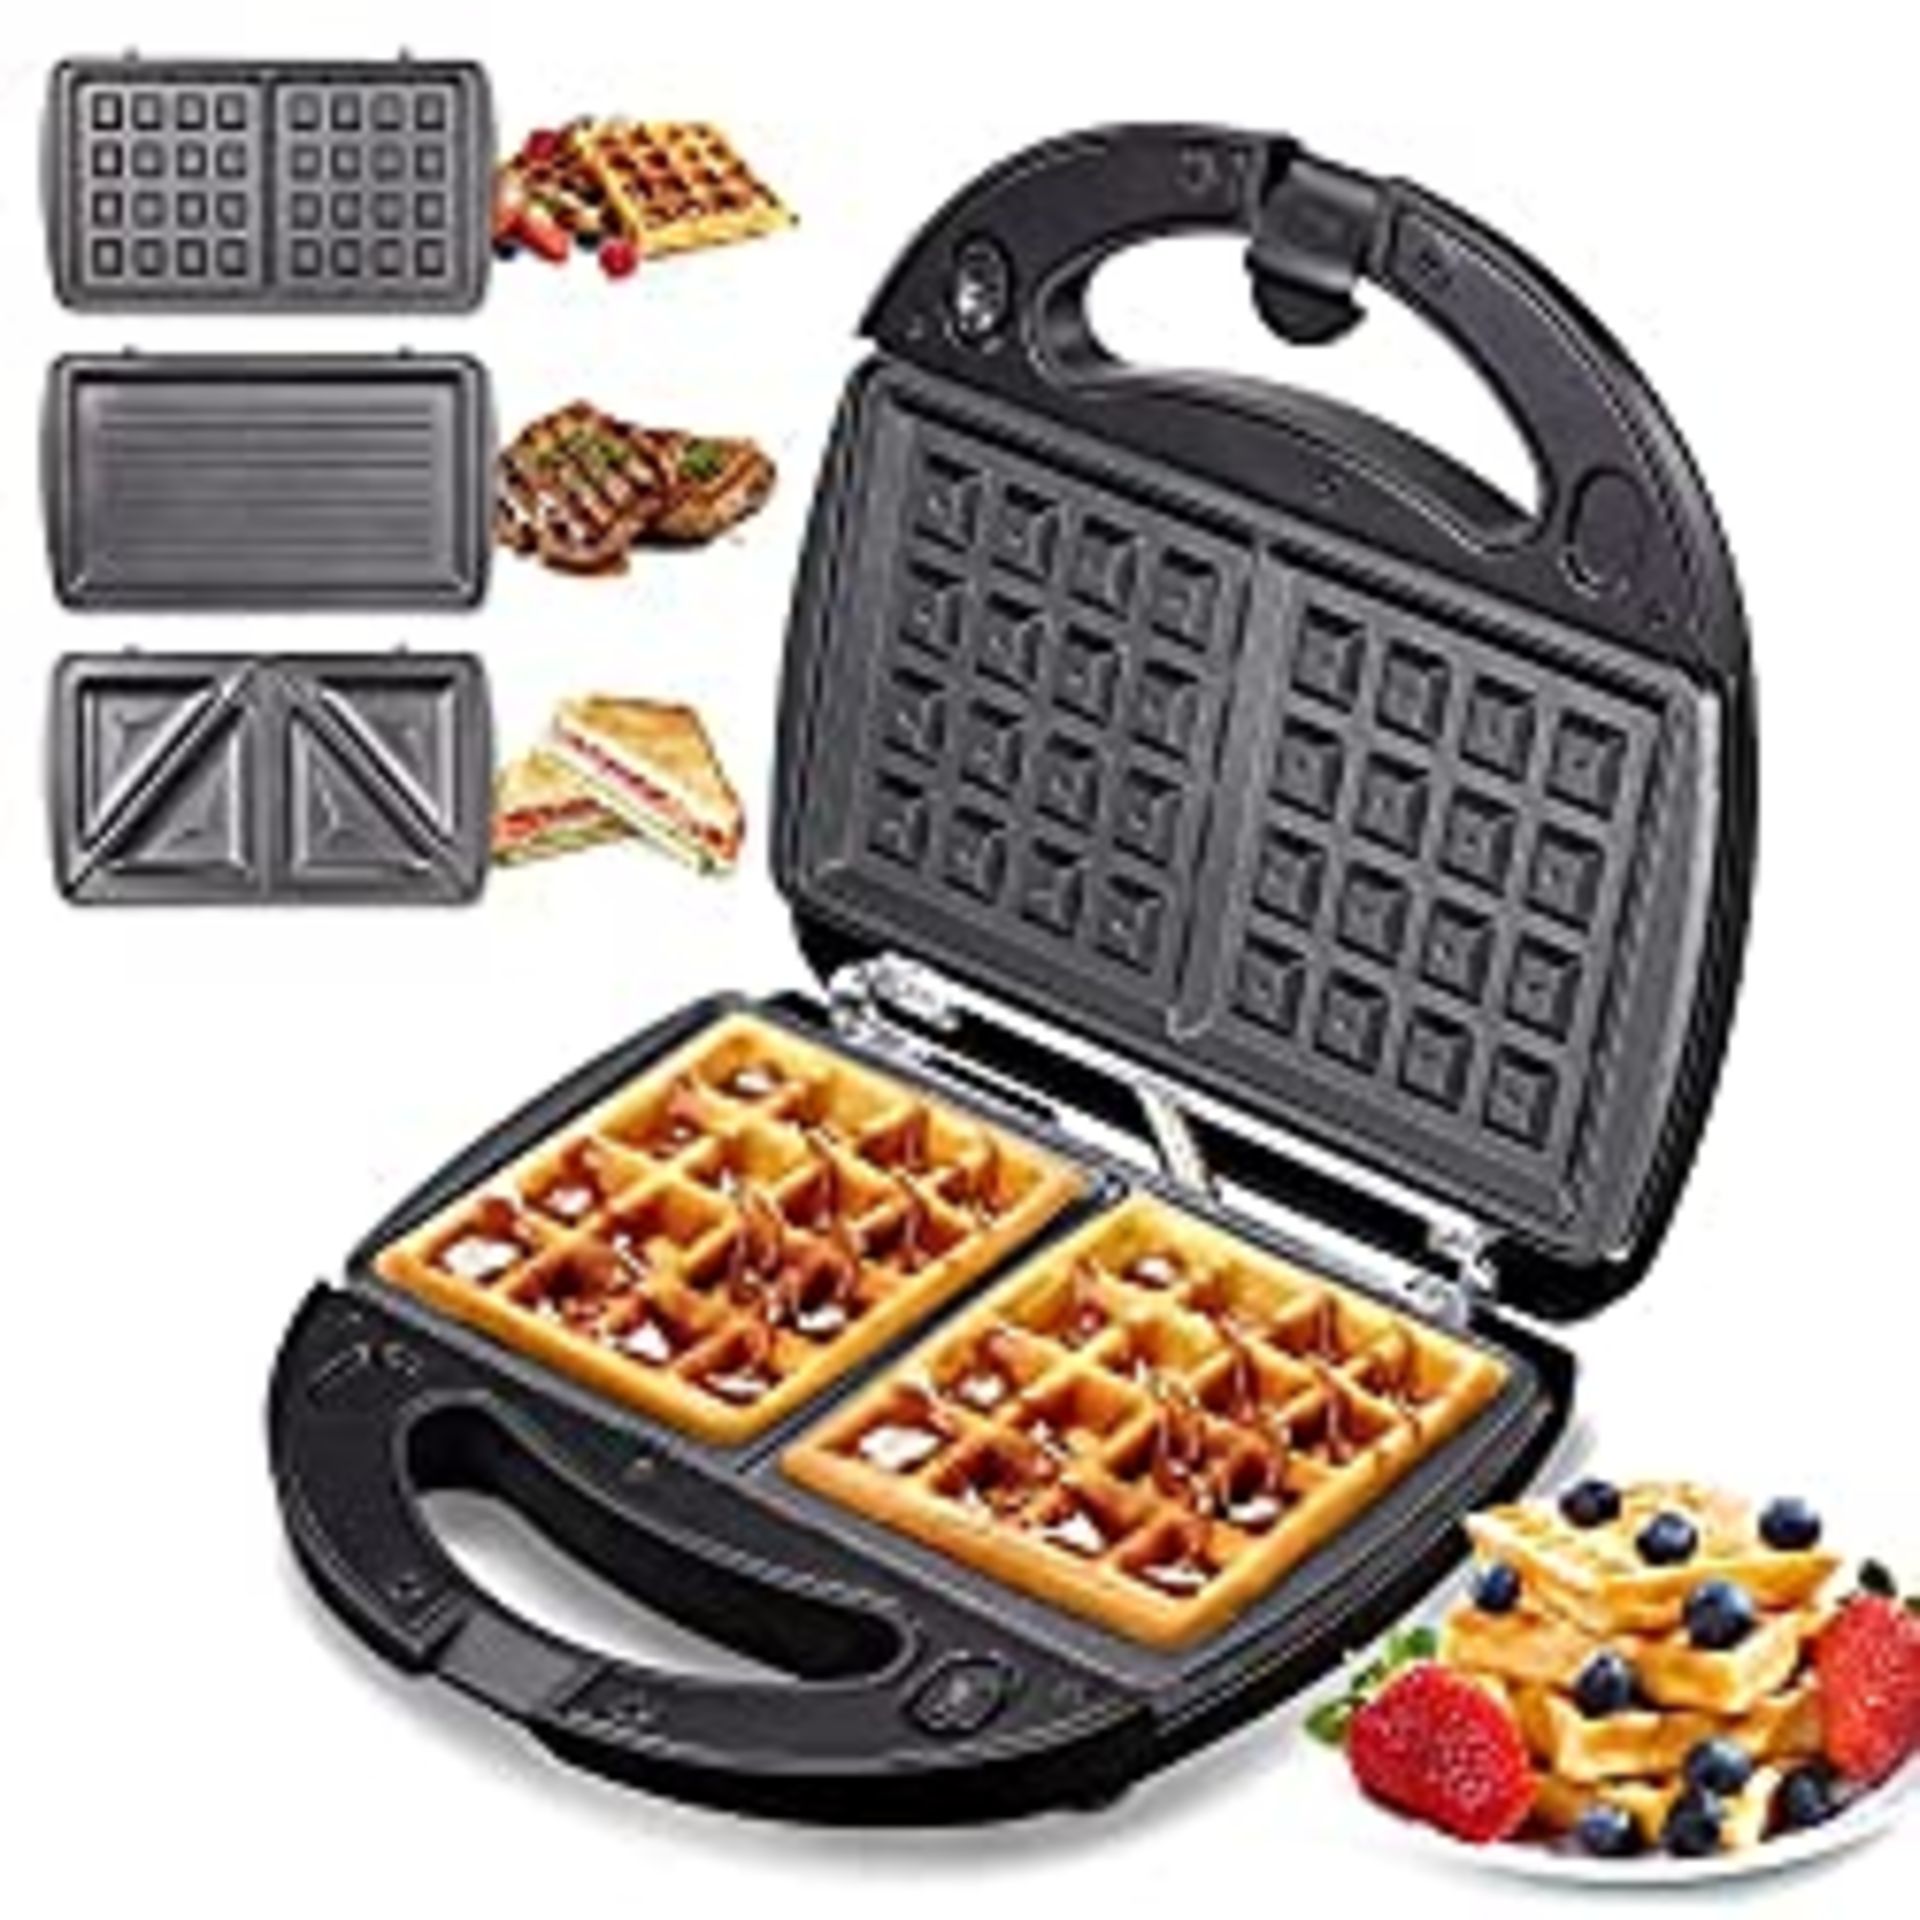 RRP £34.21 Yabano Sandwiches Toaster 3 in 1 Toastie Makers Waffle